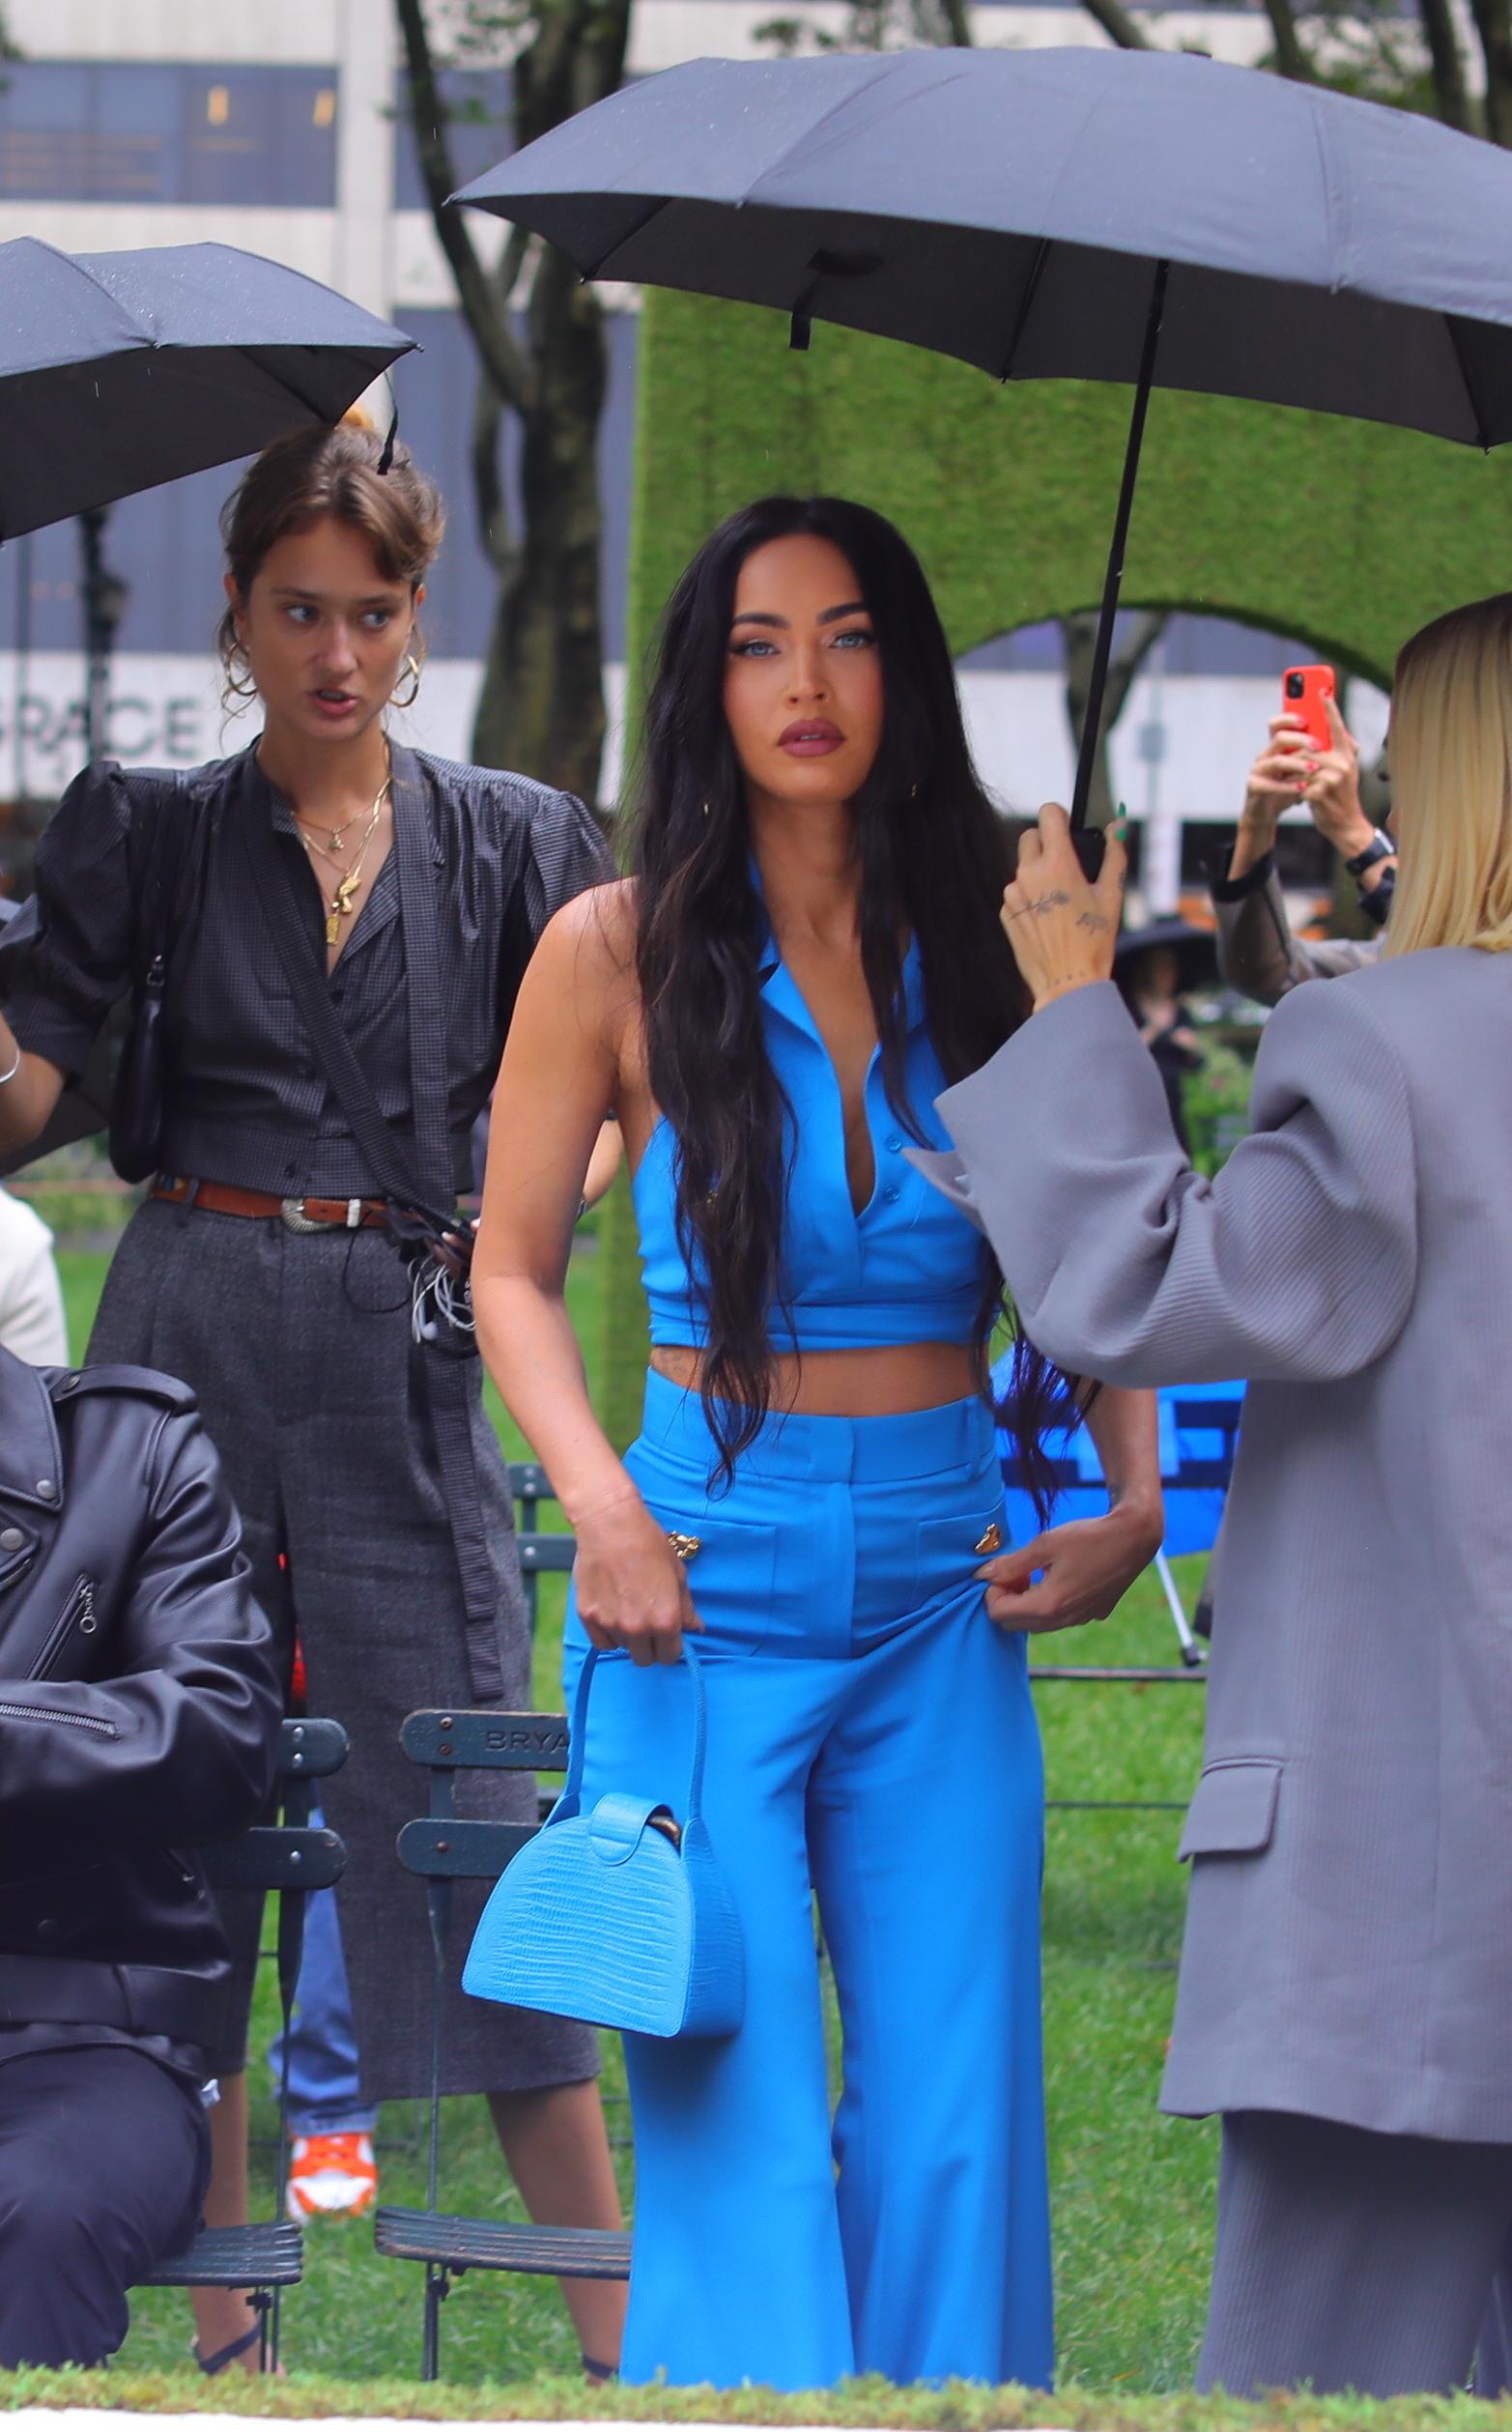 Megan Fox stuns in blue as she stares into the cameras while holding an umbrella in the rain during the Moschino fashion show held outside during fashion week in NYC